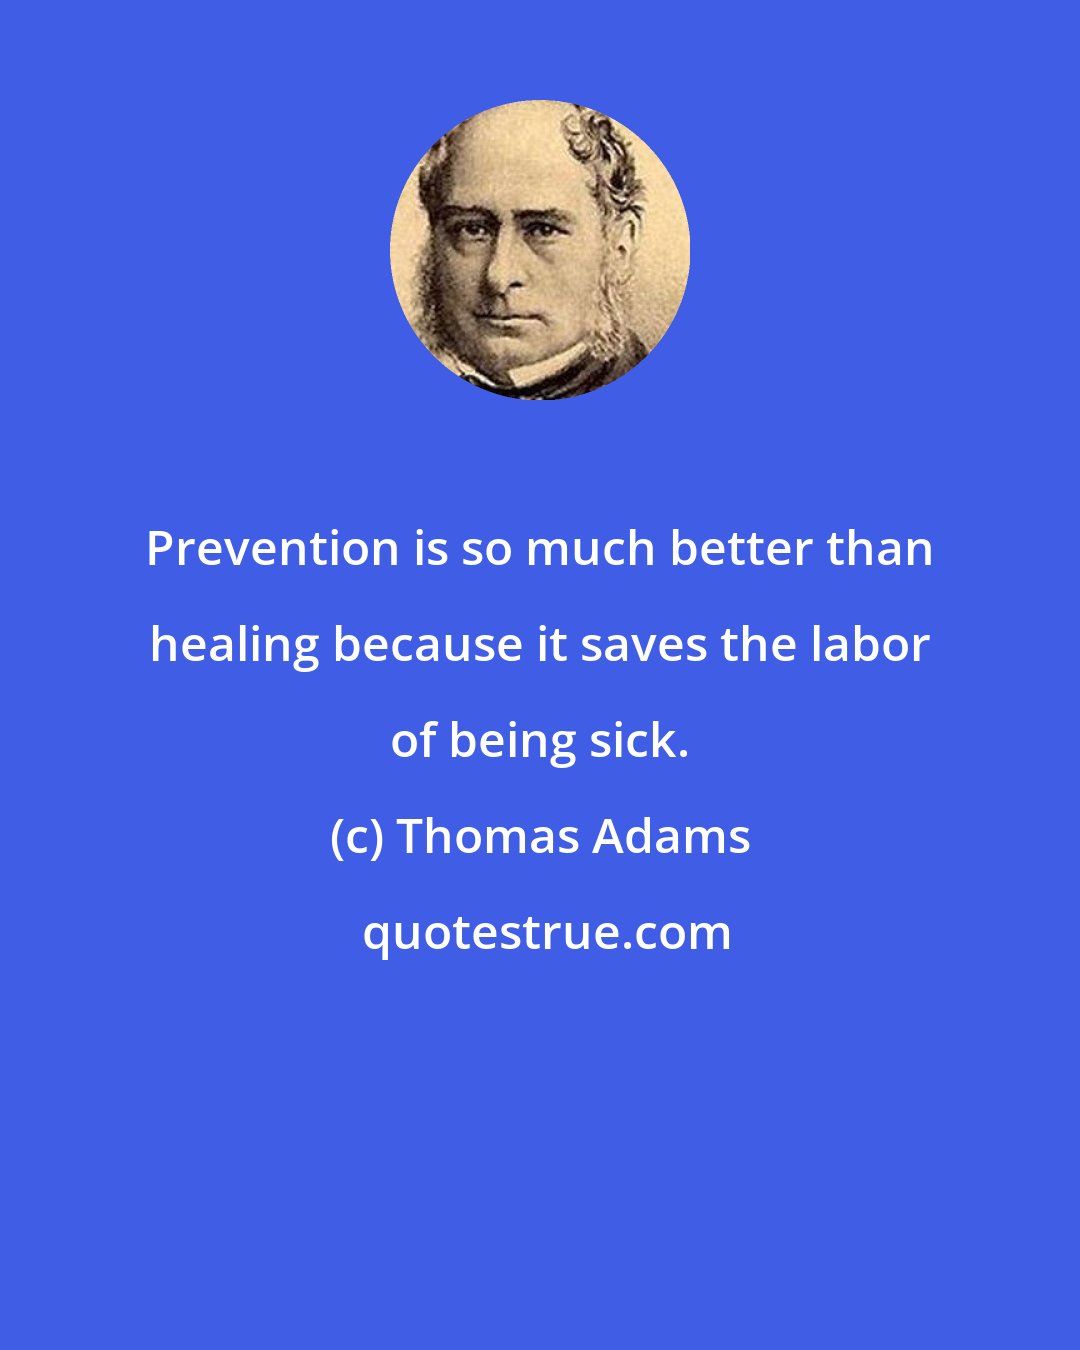 Thomas Adams: Prevention is so much better than healing because it saves the labor of being sick.